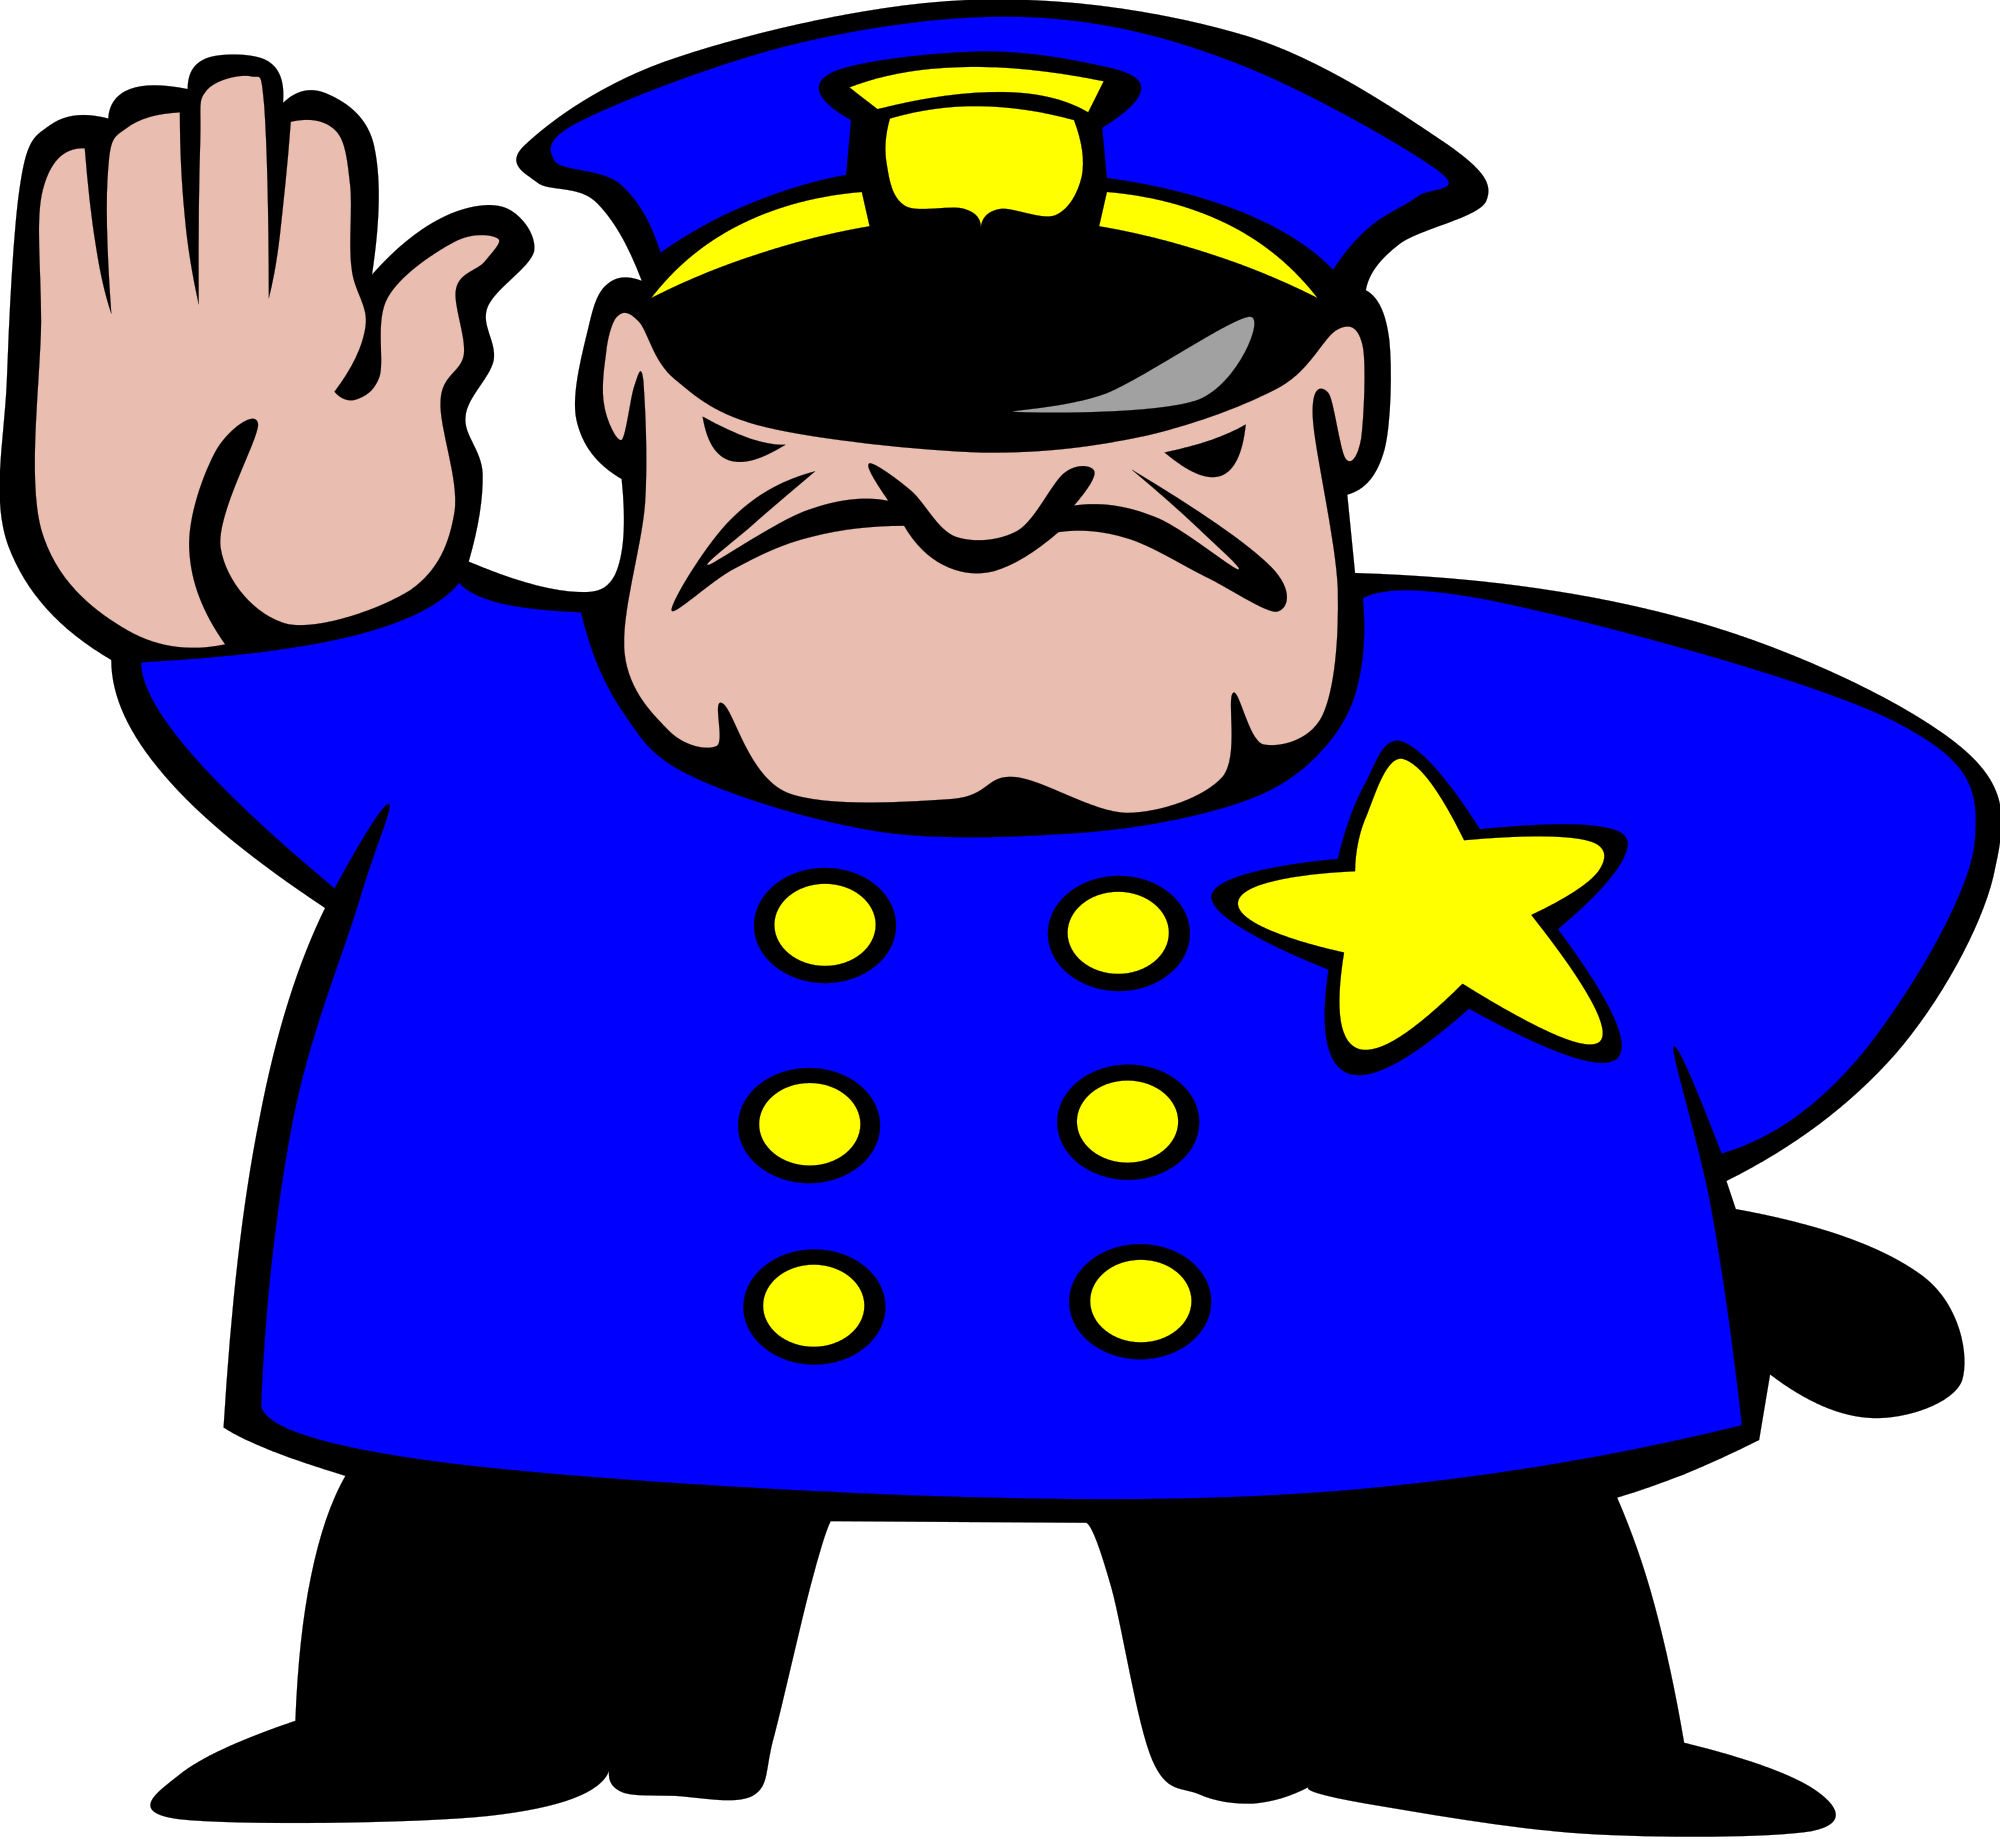 tool clipart police officer